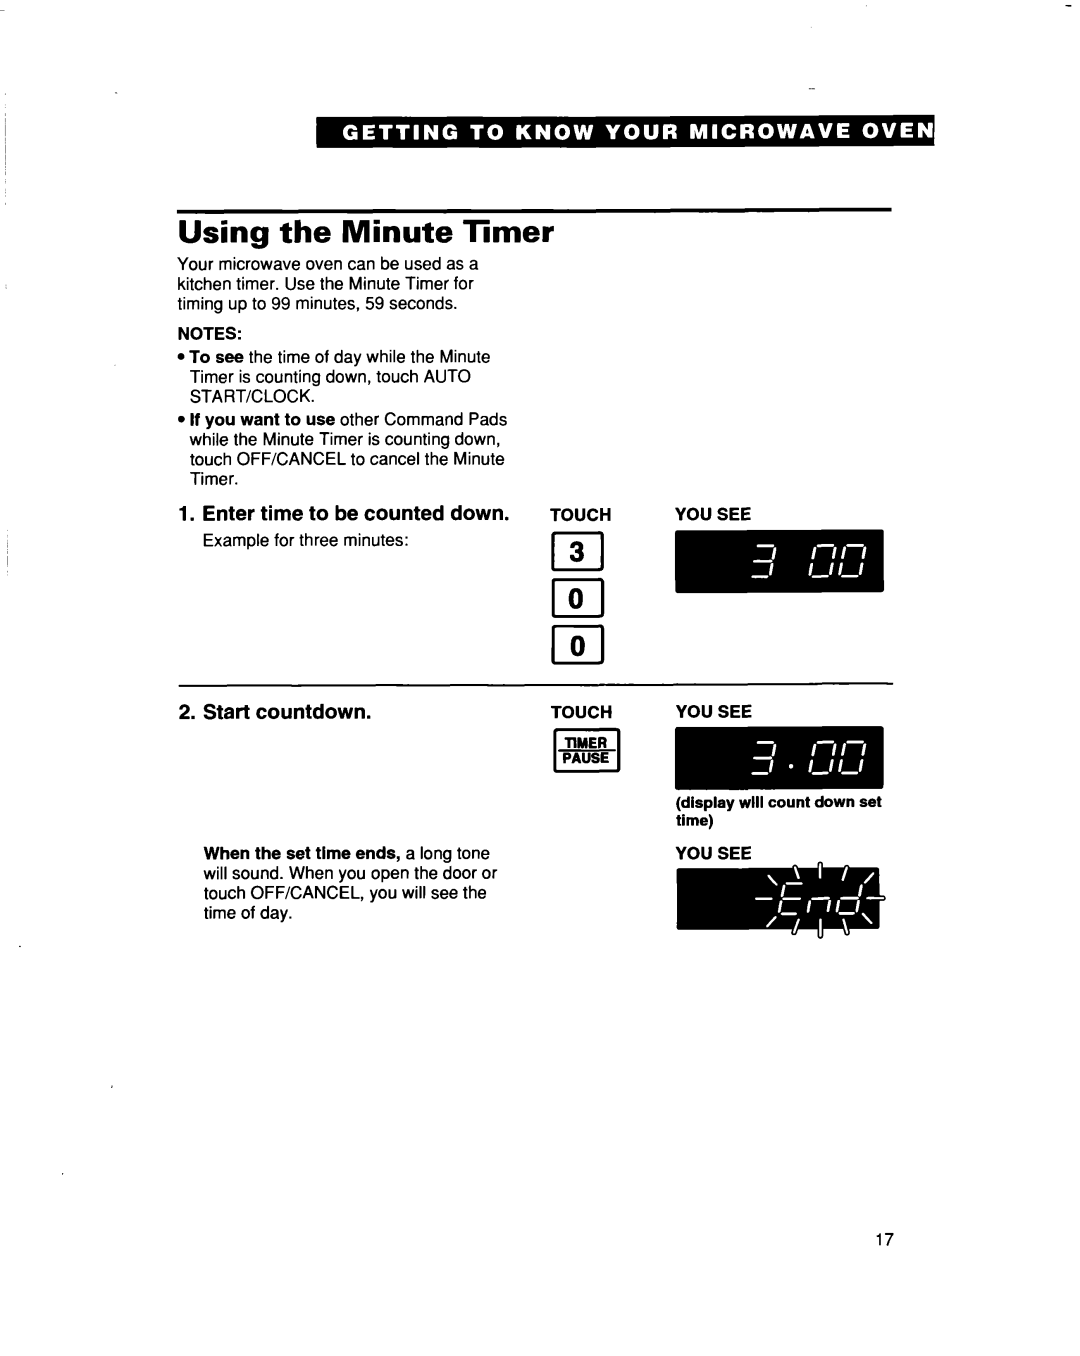 Whirlpool MT5120XAQ Using, Minute, limer, Enter, time to, be counted, Start countdown, You See 